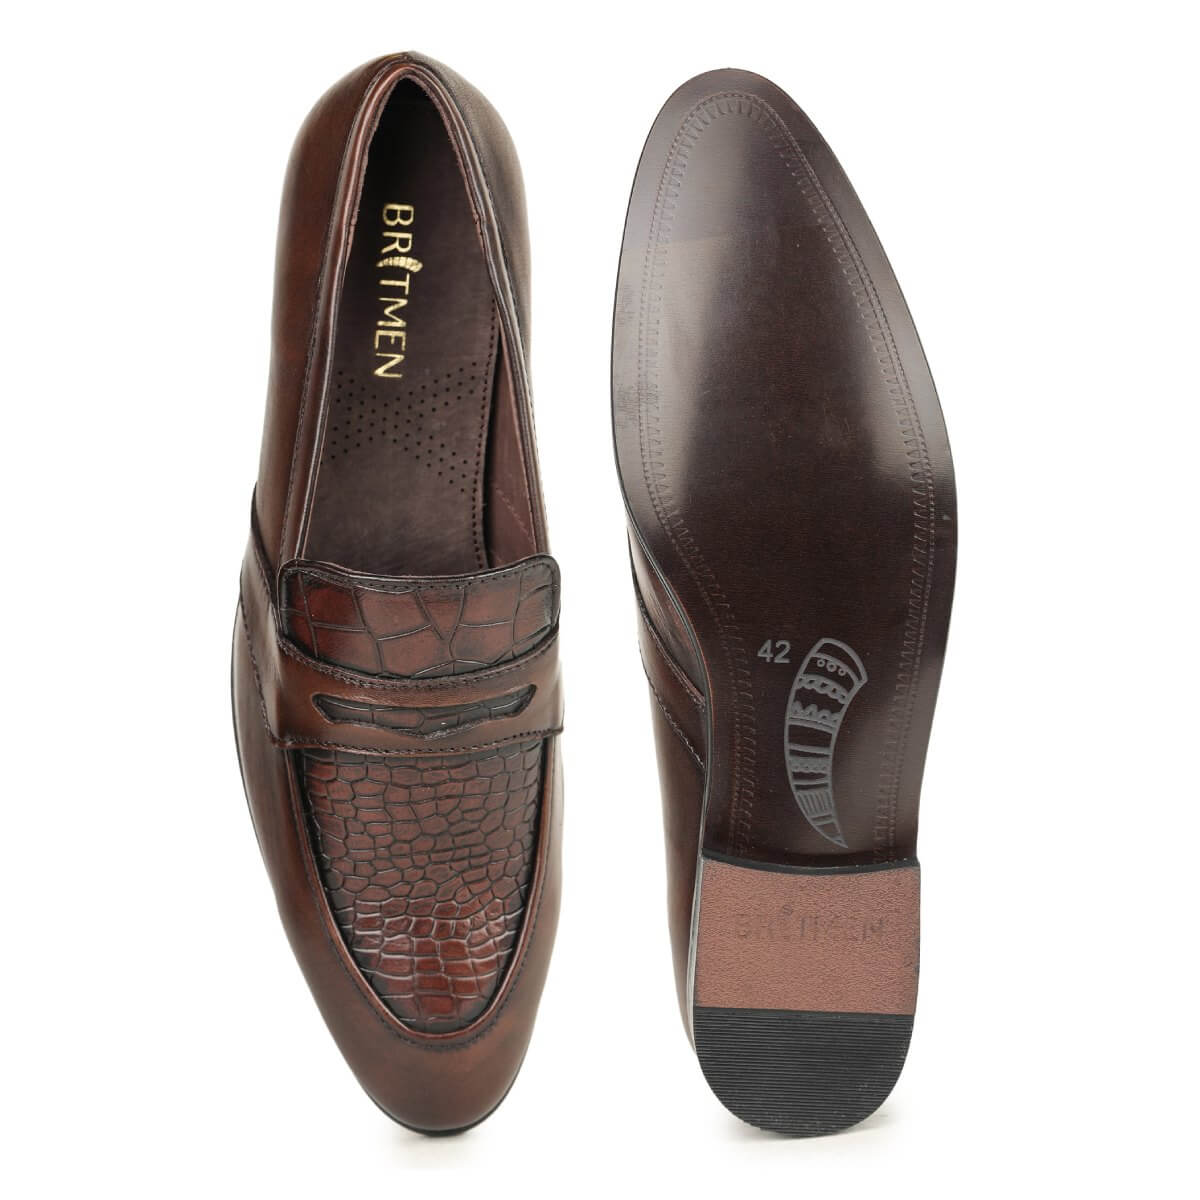 textured slip on formal shoes brown5